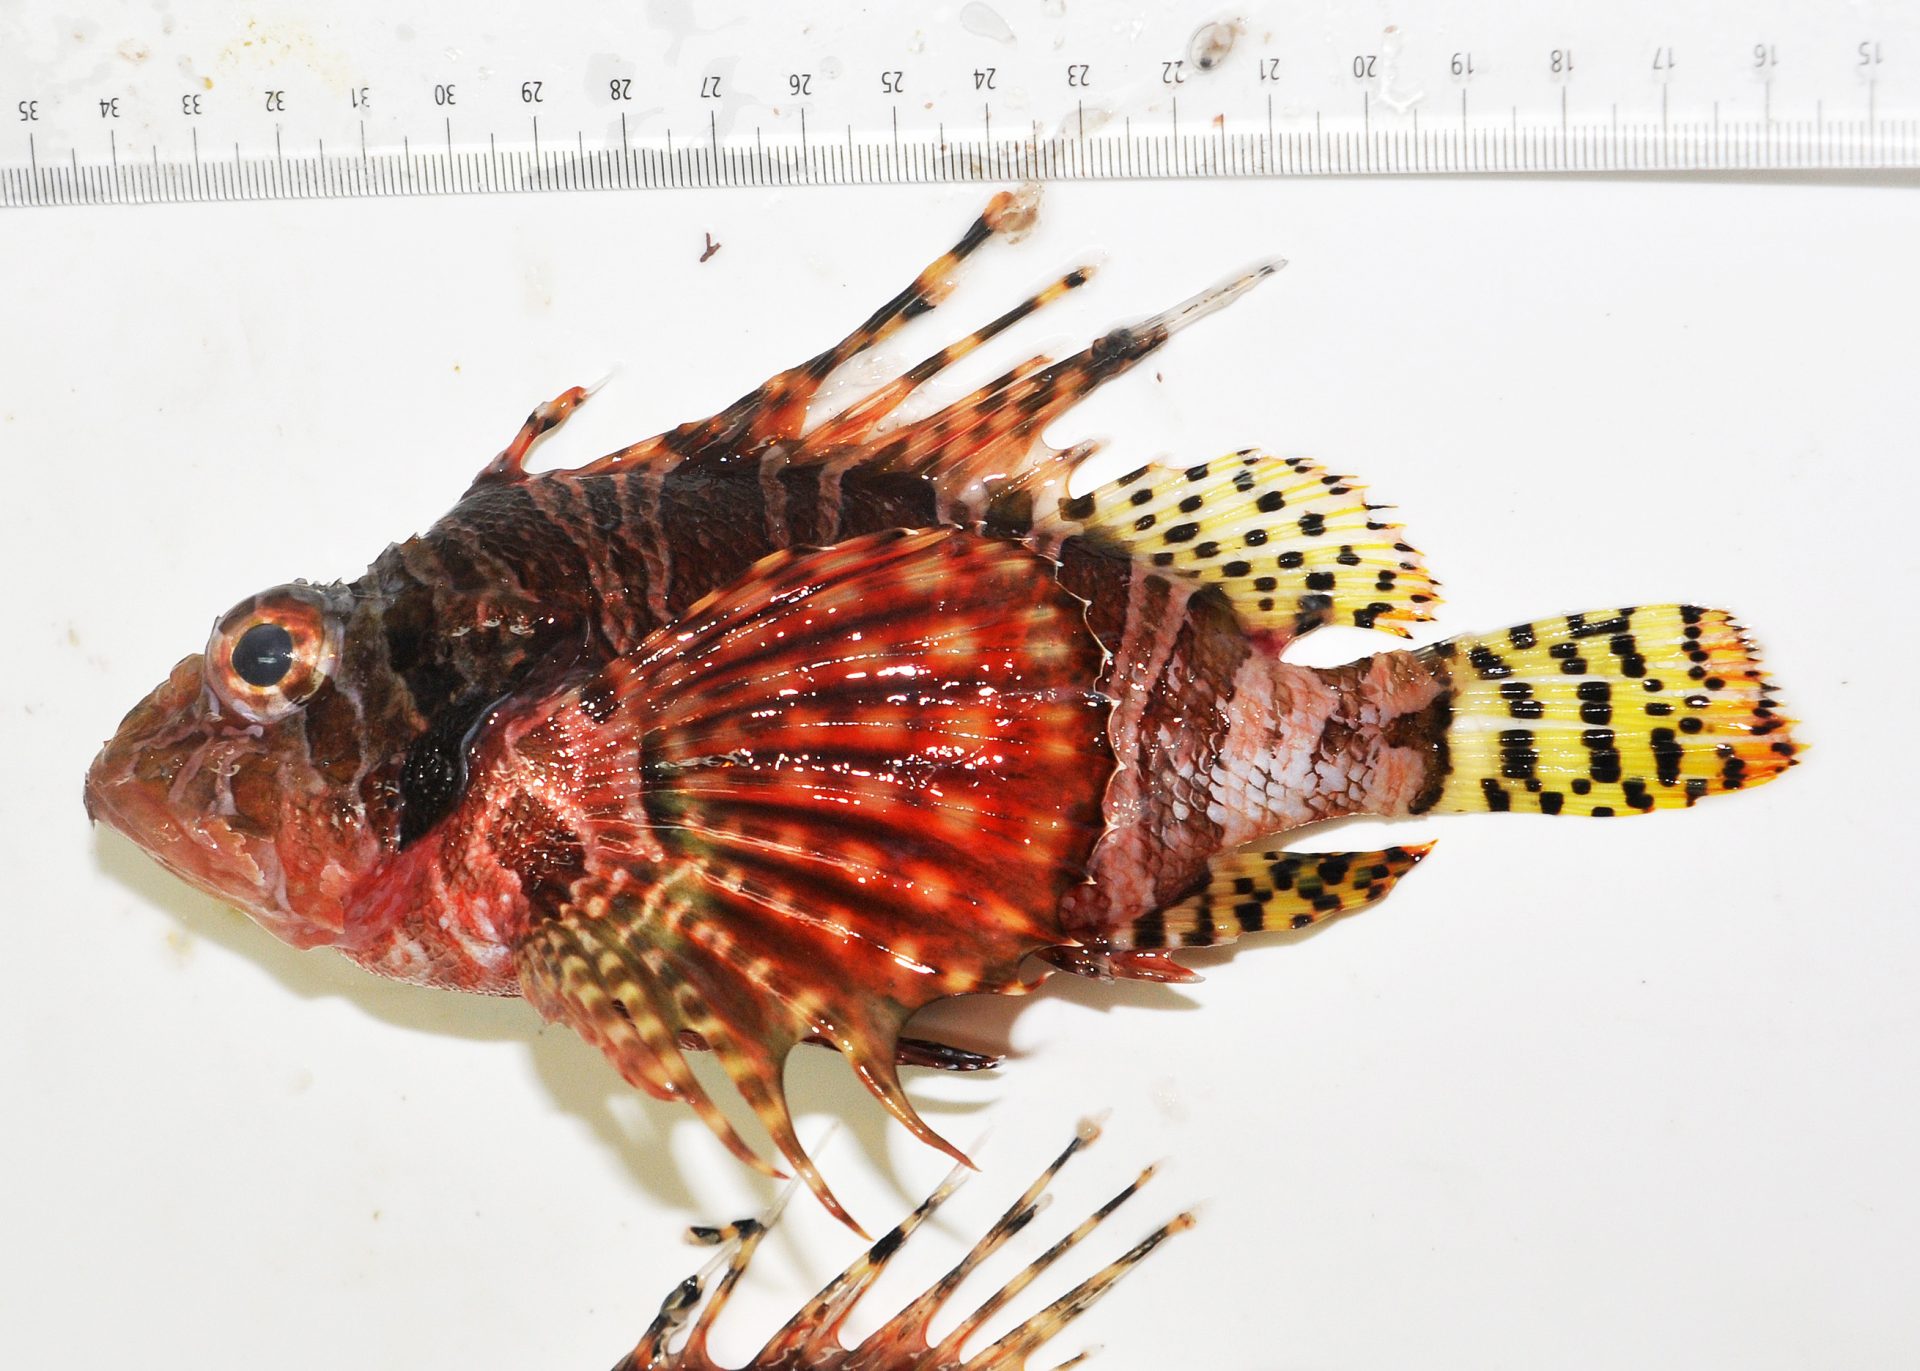 Zebra lionfish Dendrochirus zebra photo. Photograph by M. Francis, reproduced courtesy of Auckland Museum